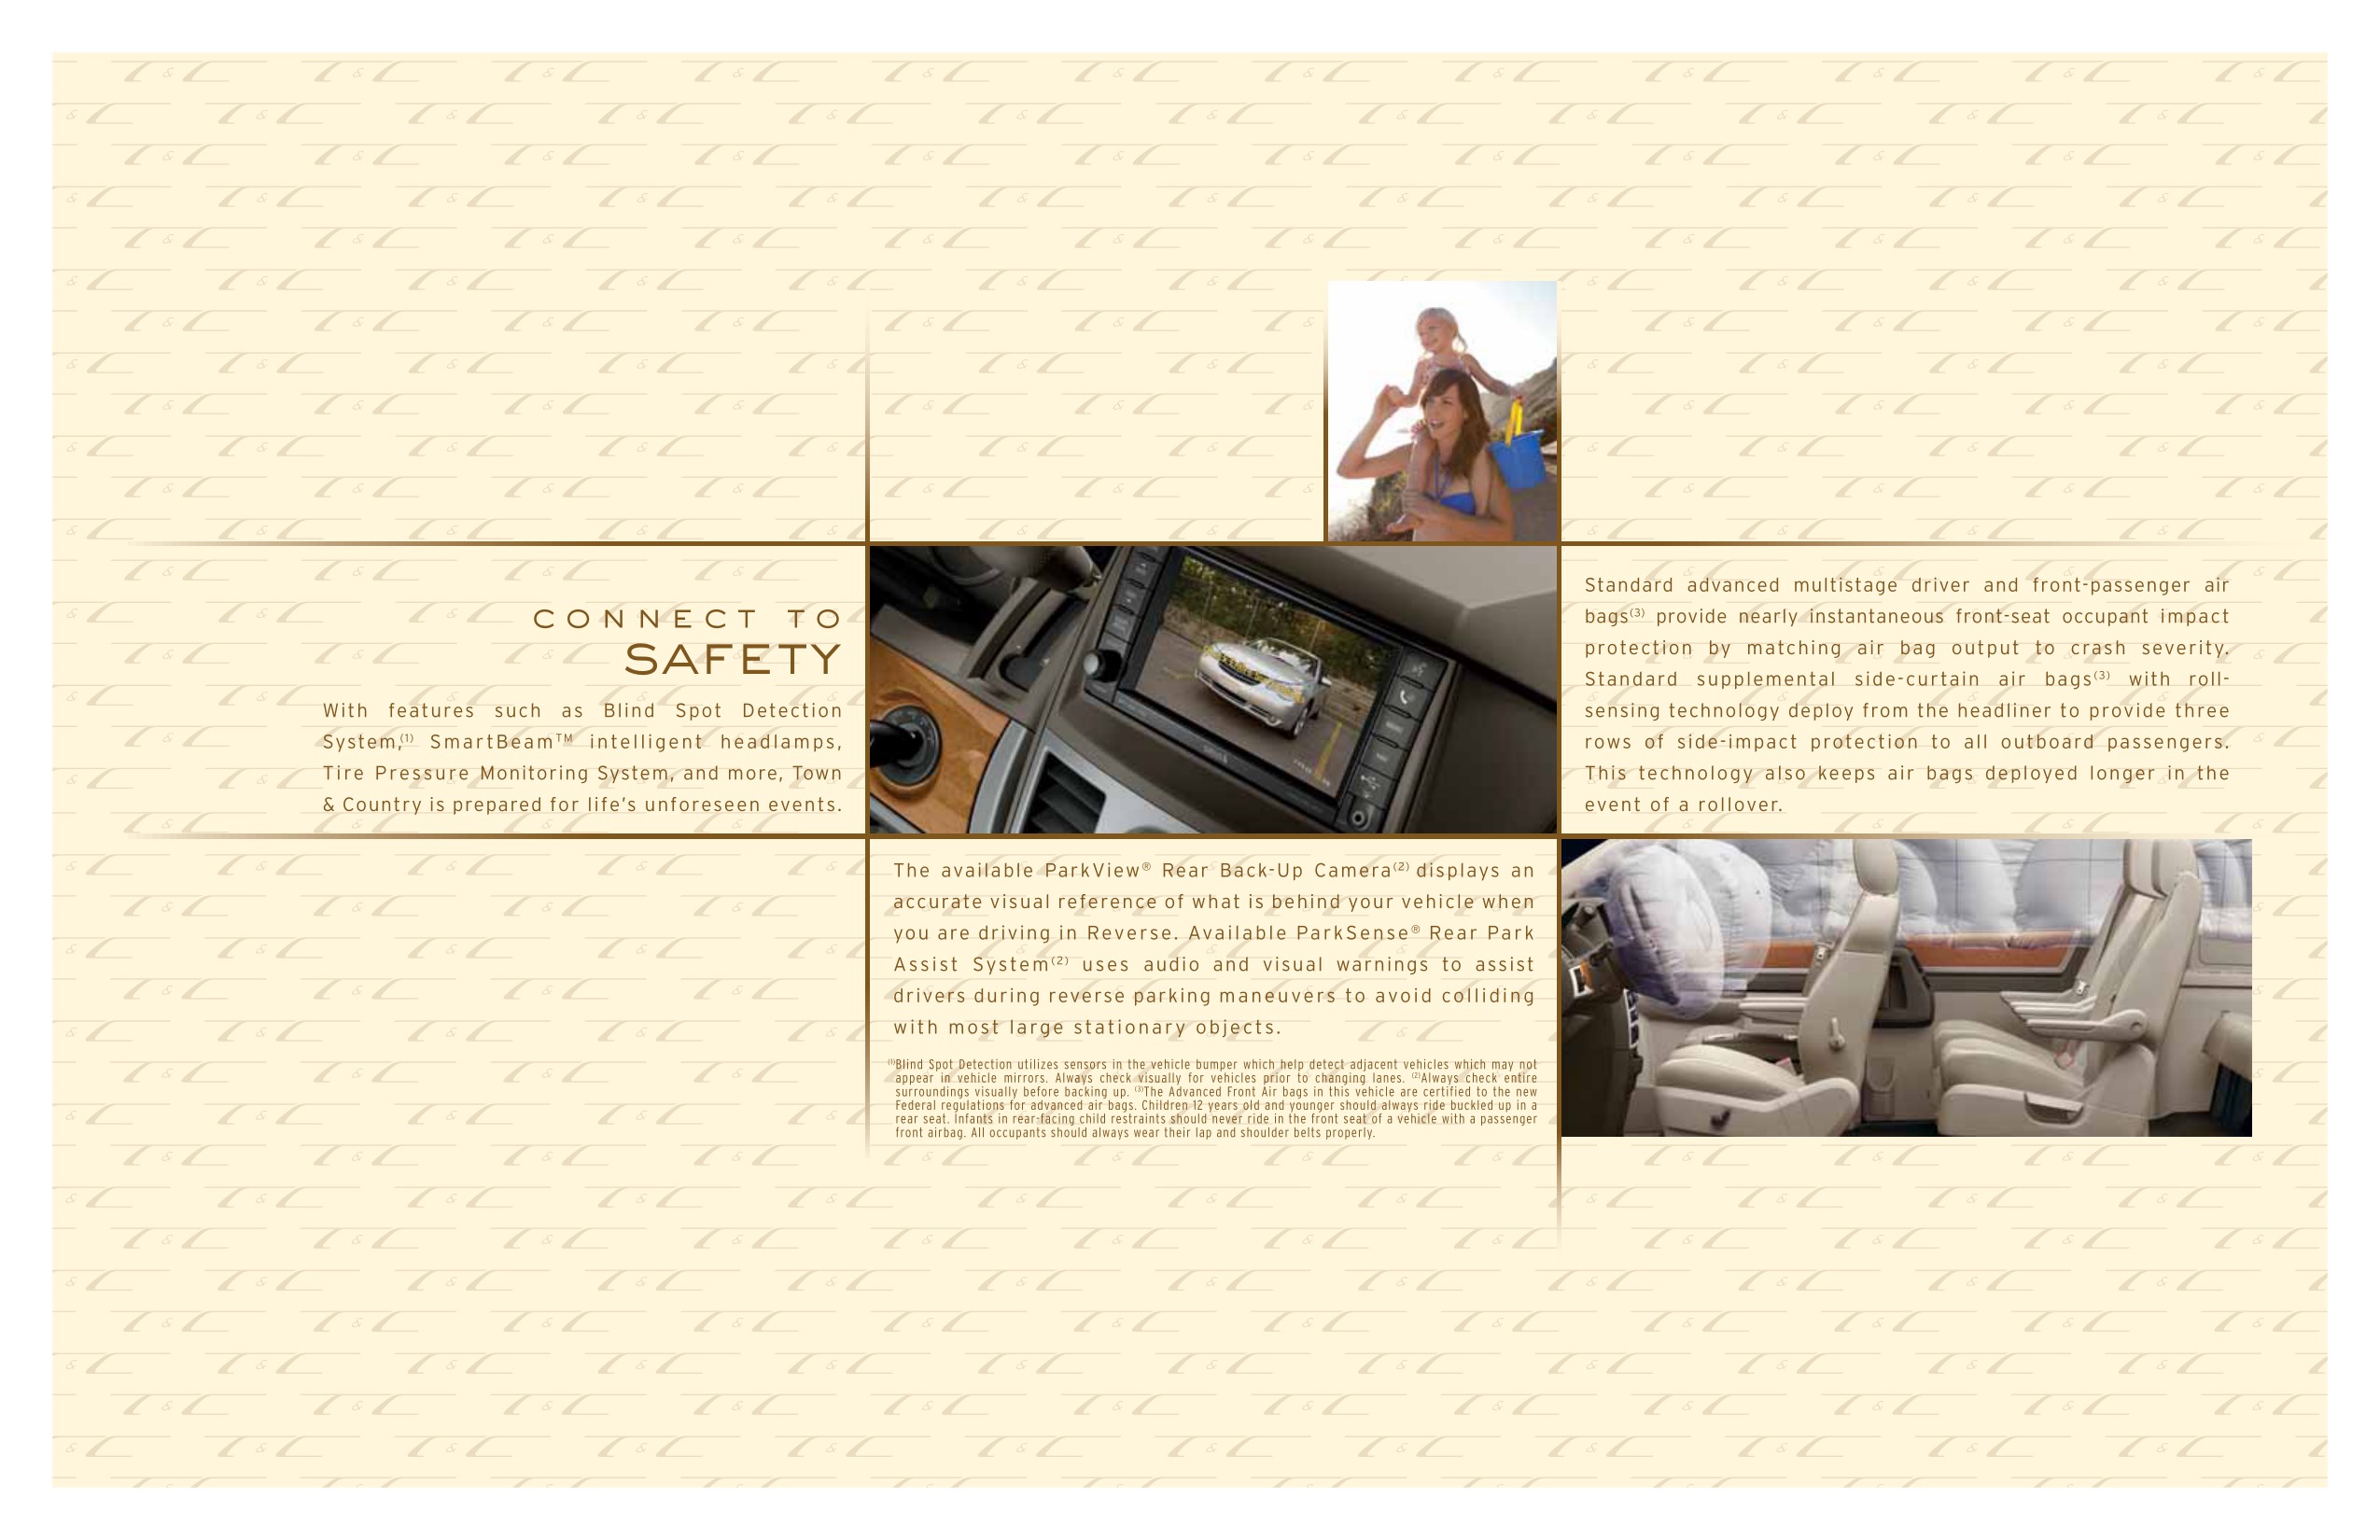 2010 Chrysler Town & Country Brochure Page 11